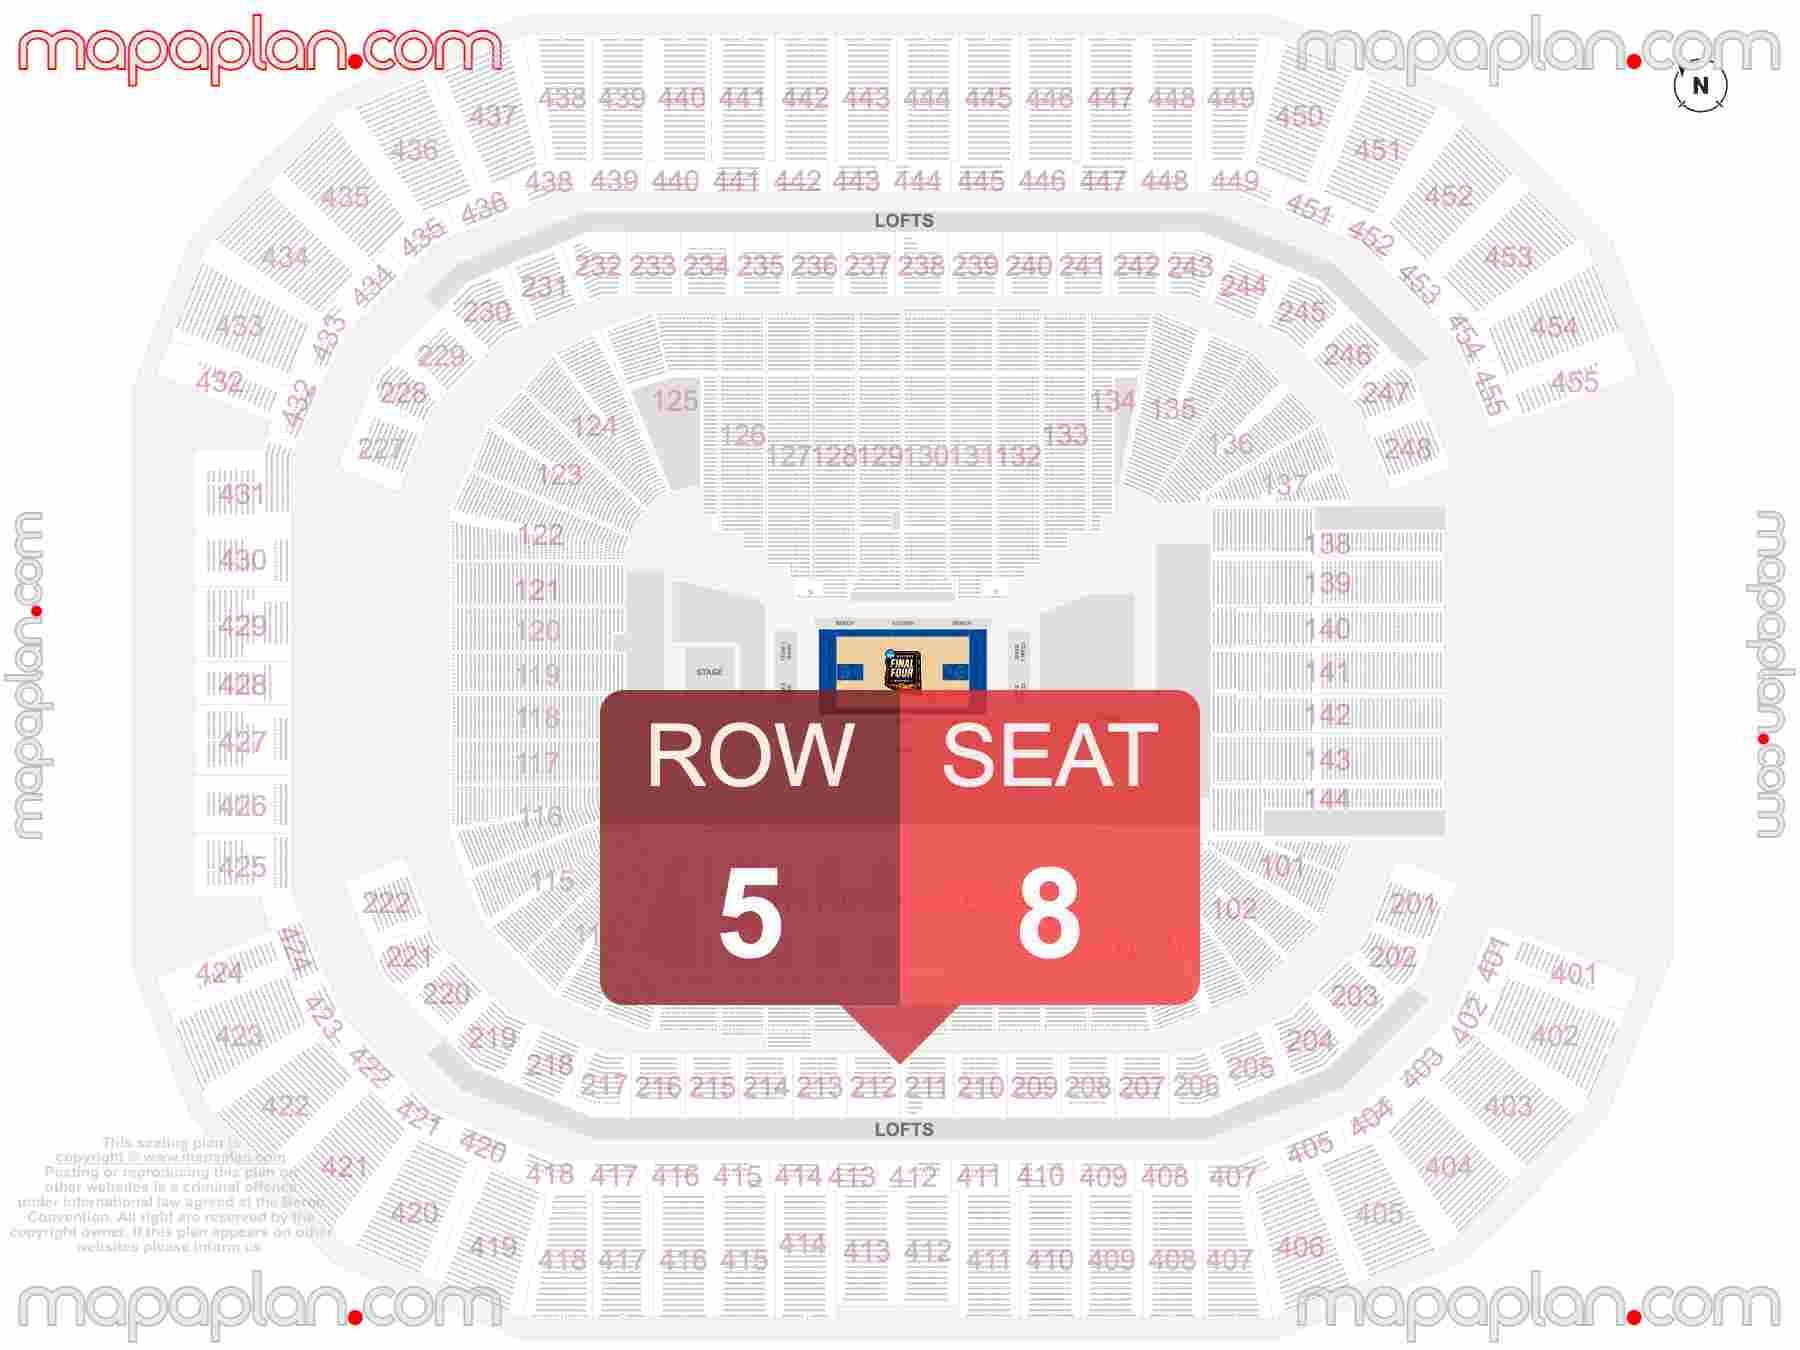 Glendale State Farm Stadium seating chart Basketball, concert, football, soccer detailed seat numbers and row numbering chart with interactive map plan layout